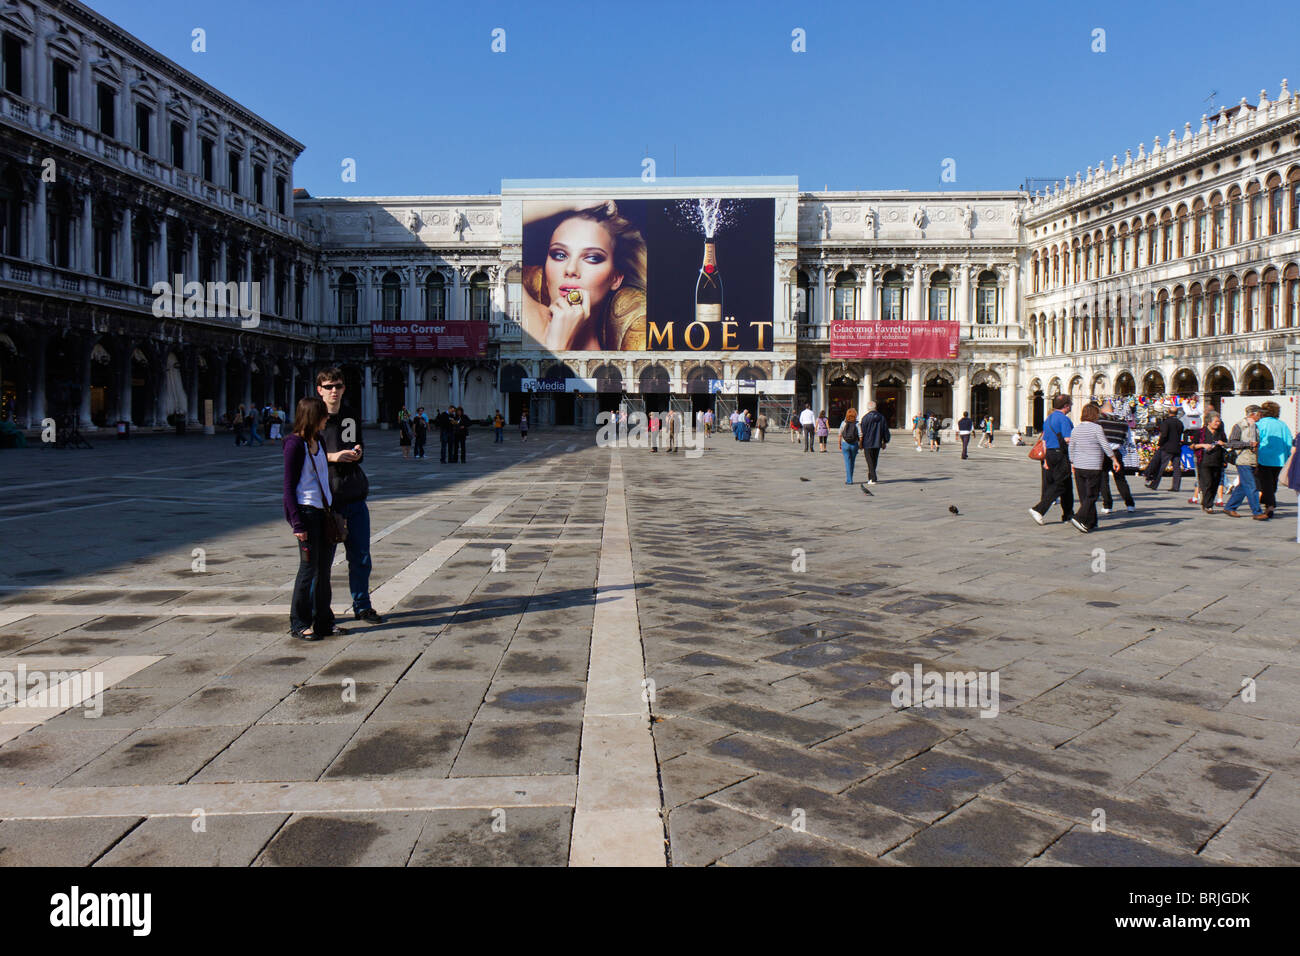 St Mark's Square Venice with large advertisement for champagne, the sponsors of restoration work behind the advert Stock Photo